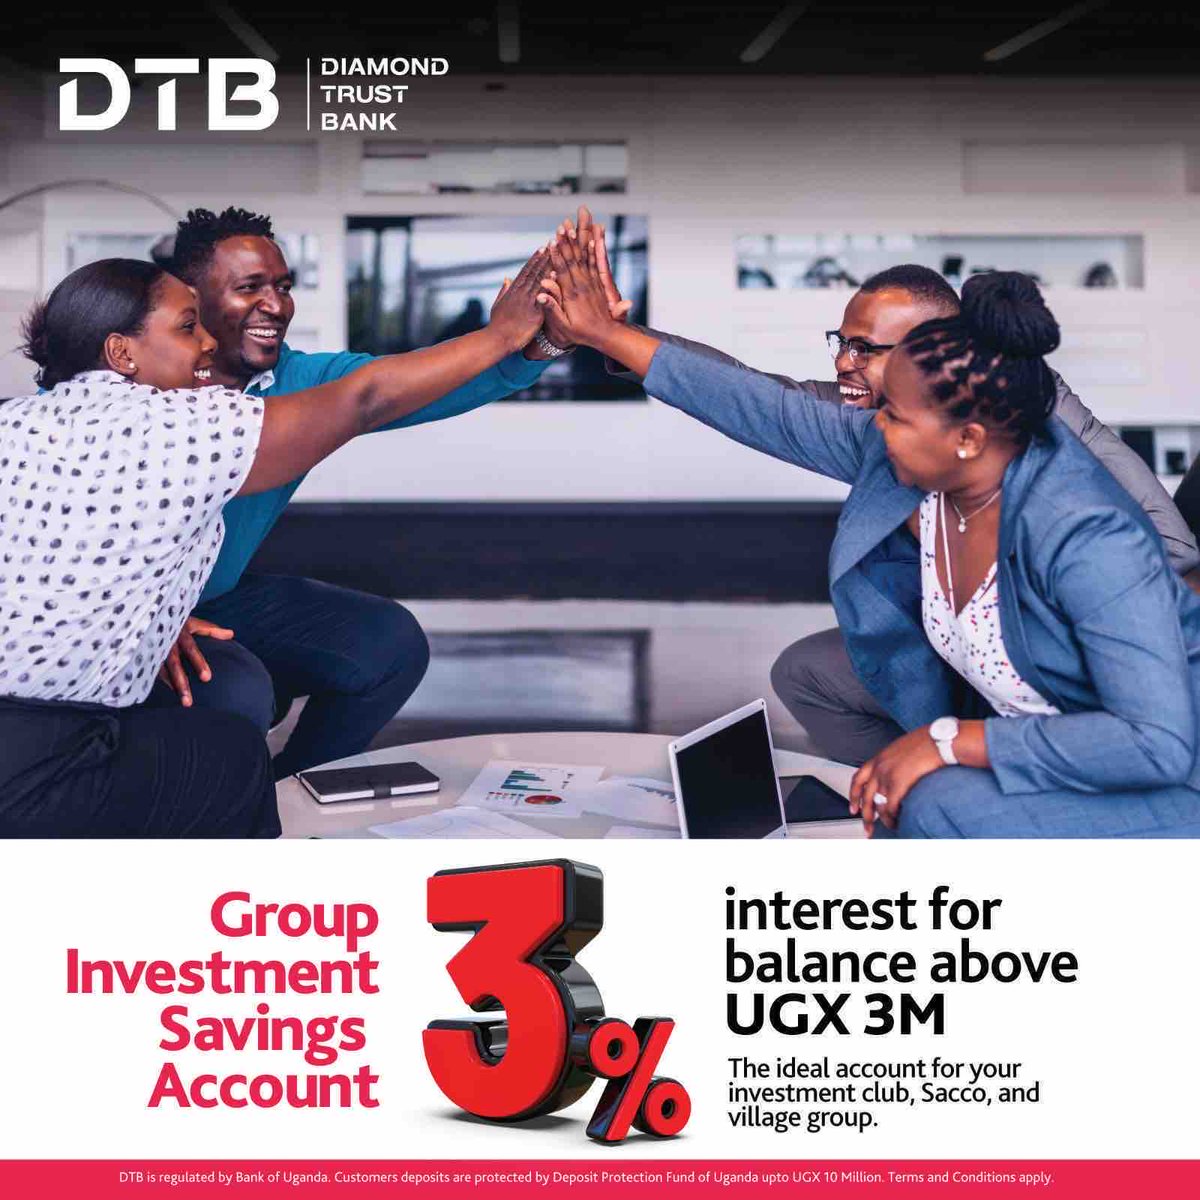 No investment goal is too big. Open a DTB Group Investment Savings Account and start the journey to financial growth. Visit any of our branches or call toll free 0800 242 242 for support. #Investment #savings #BankWithUsBankOnUs